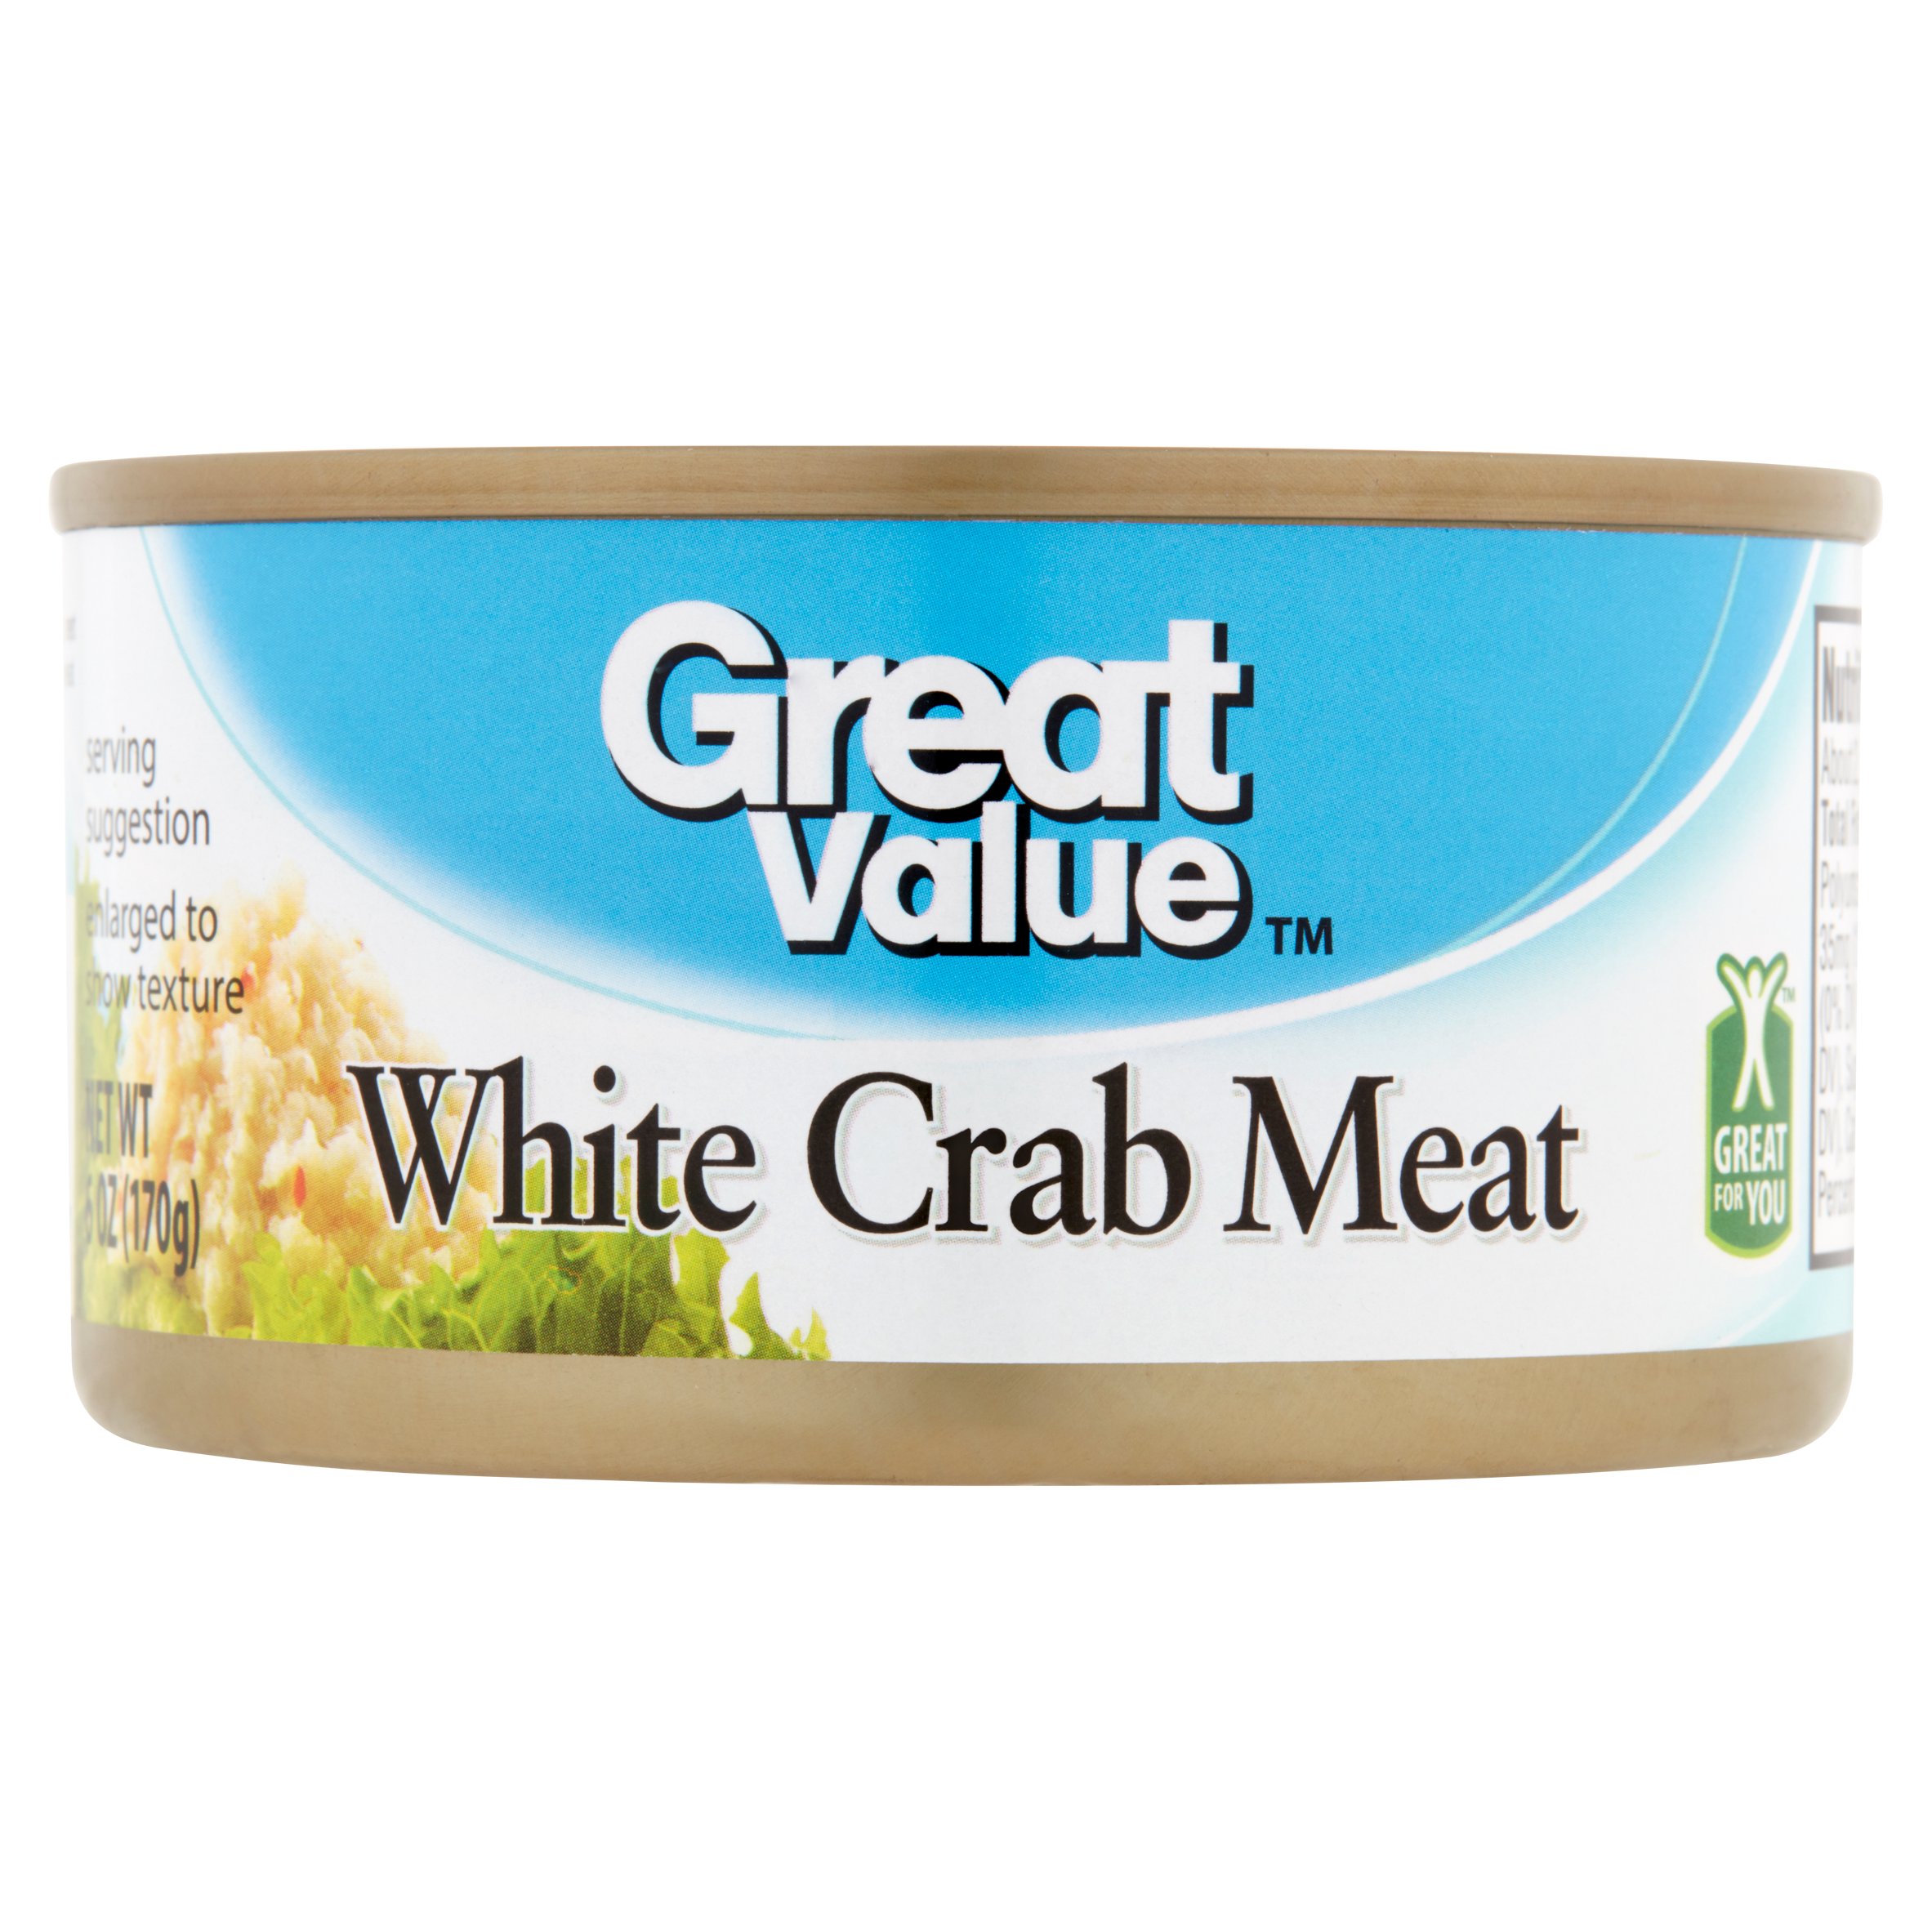 Great Value White Crab Meat, 6 Oz Image